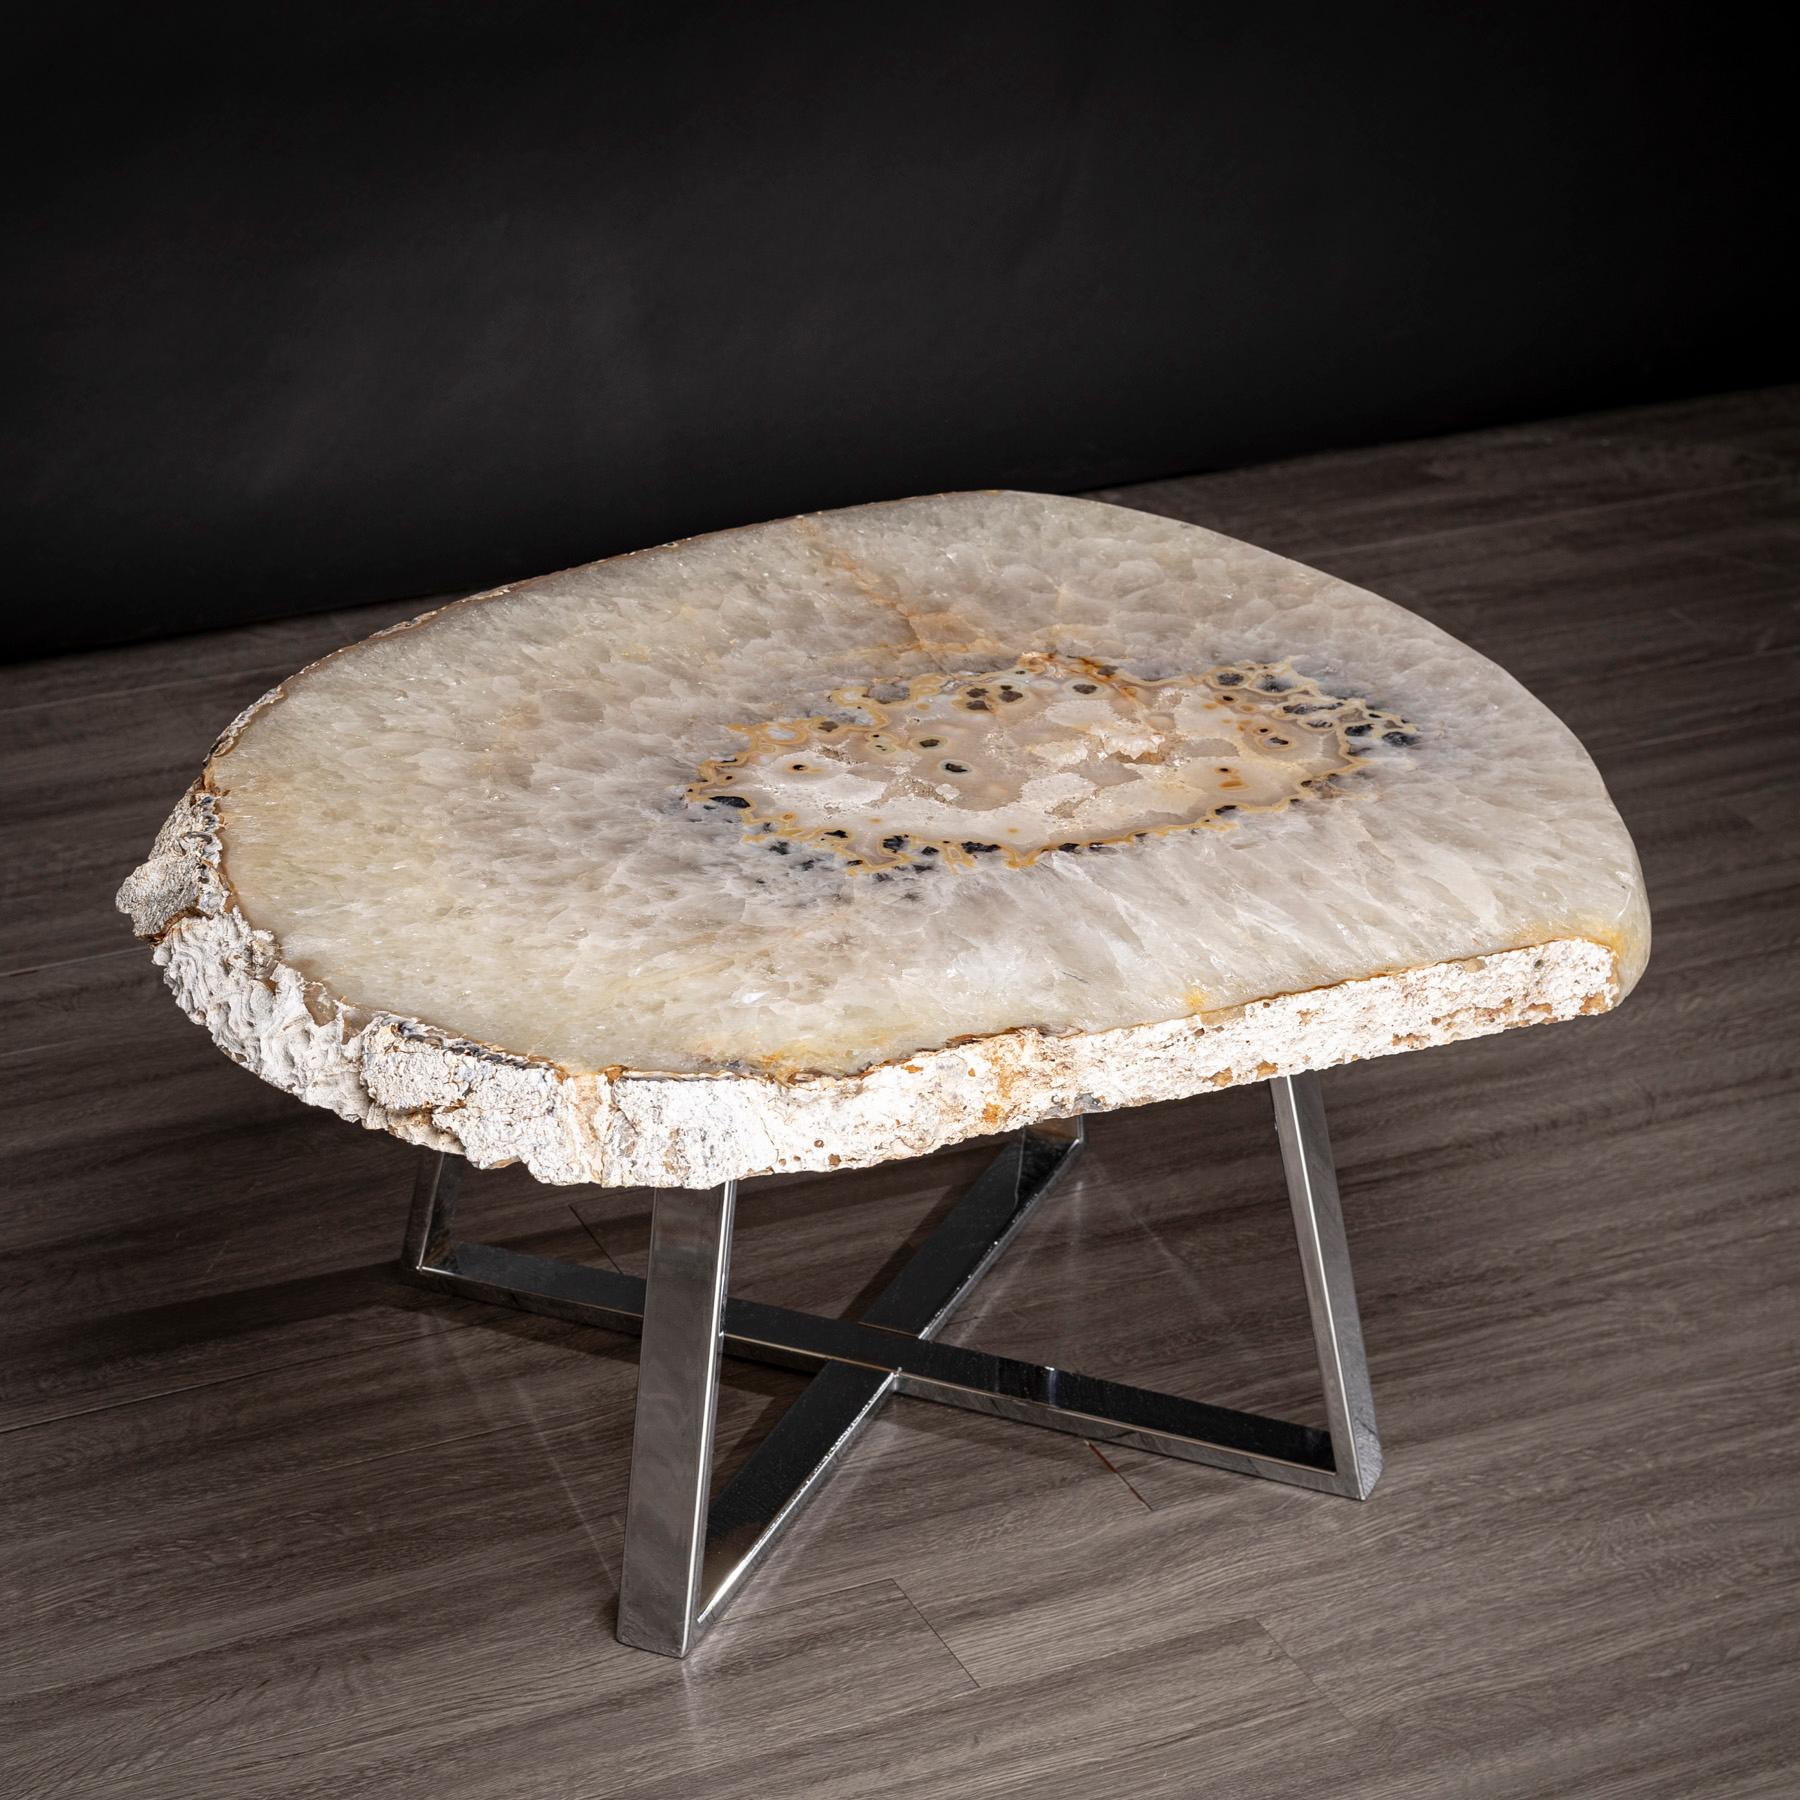 This agate slab forming a side table or cocktail table, is from Brazil and has a combination of colors with hints of grey and white. Agates are formed in rounded nodules, which are sliced open to bring out the internal pattern hidden in the stone.